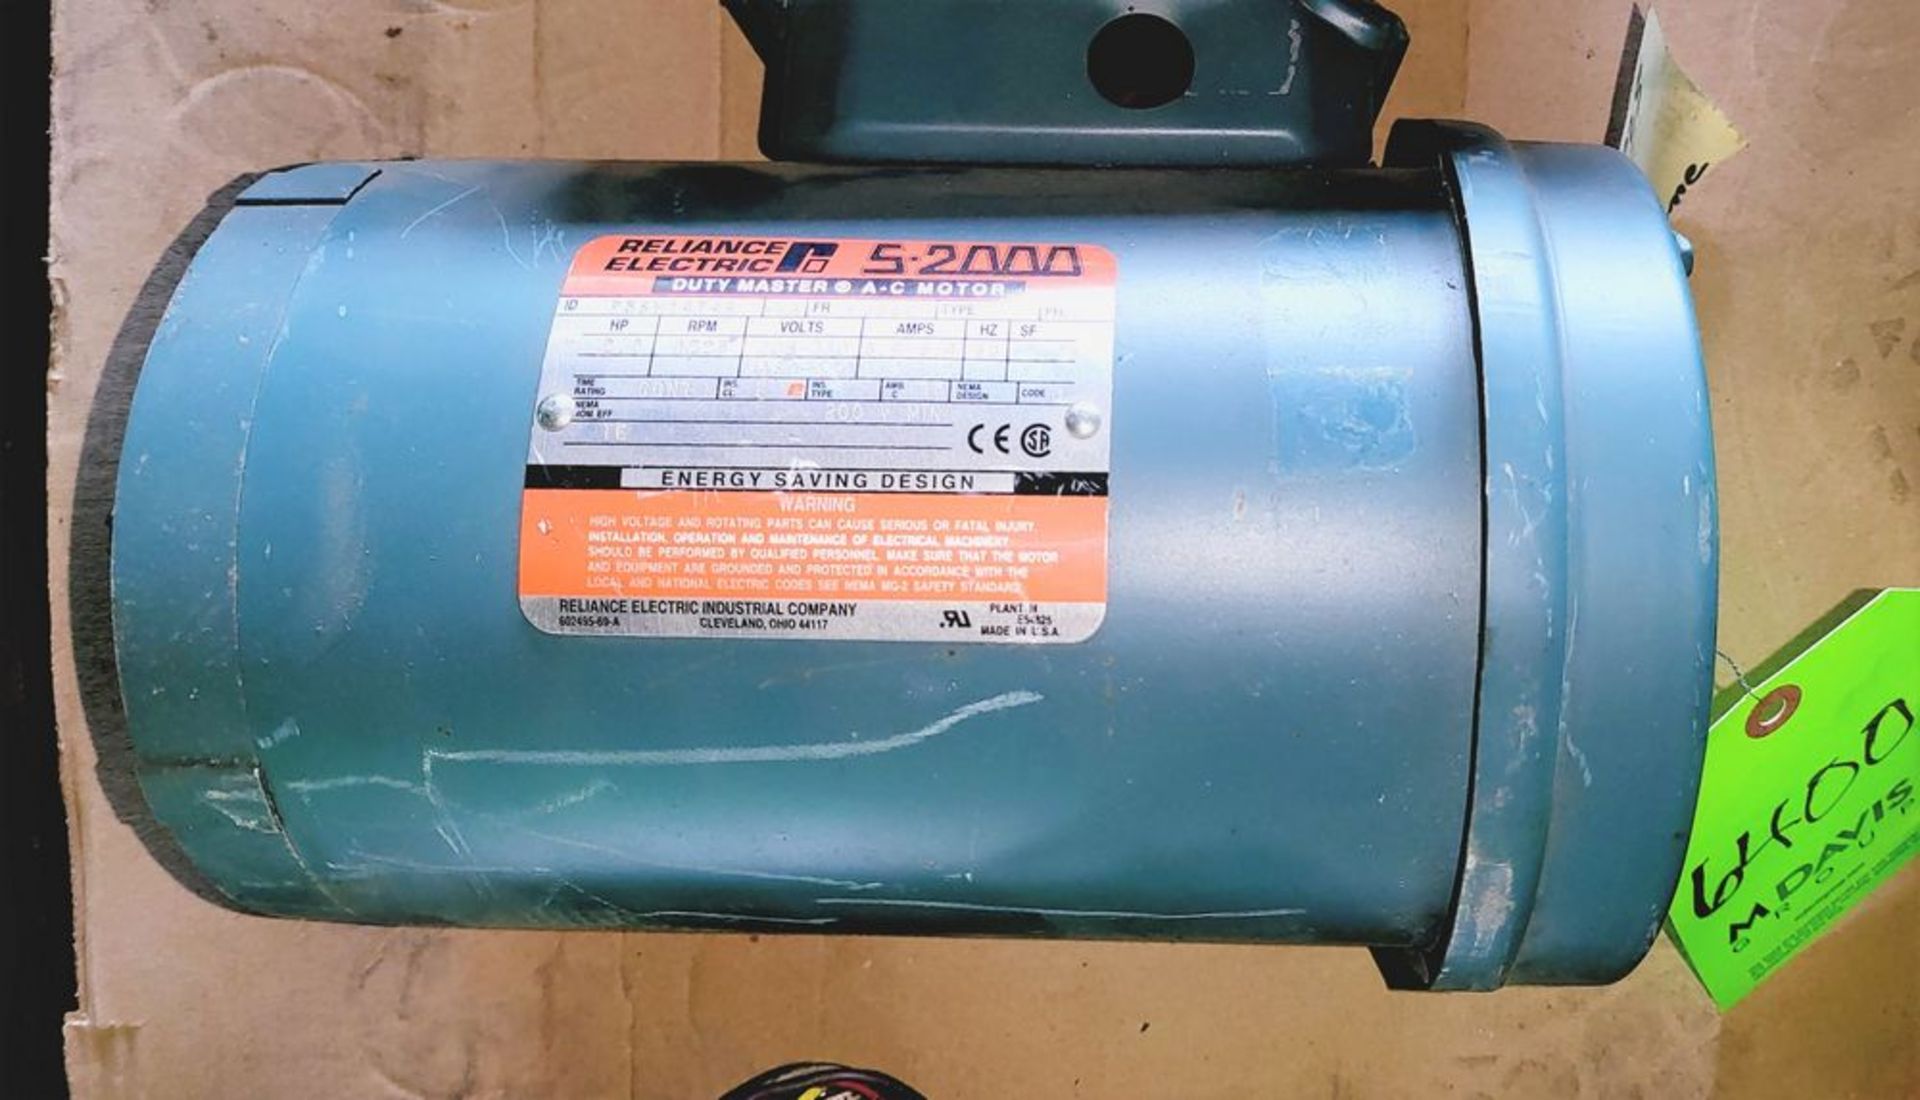 Qty (1) Reliance Electric 5.2000 FJ56C Frame Motor - 3 phase - 2 hp - 1725 rpm - 208-230/460-480